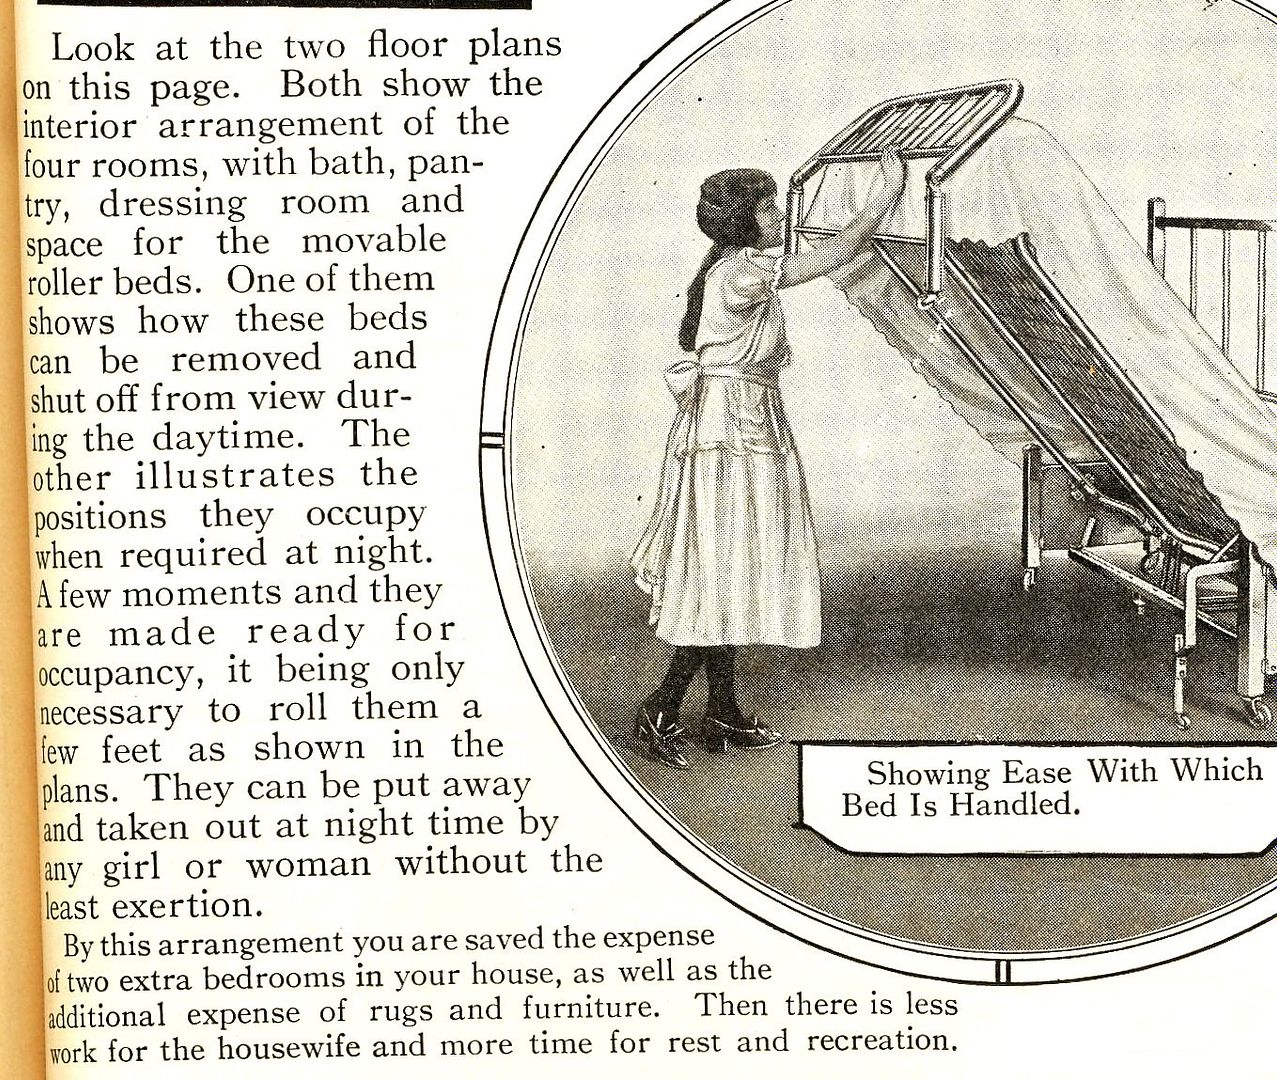 The Cinderella was another Sears House that promoted use of stowaway beds. Note the 